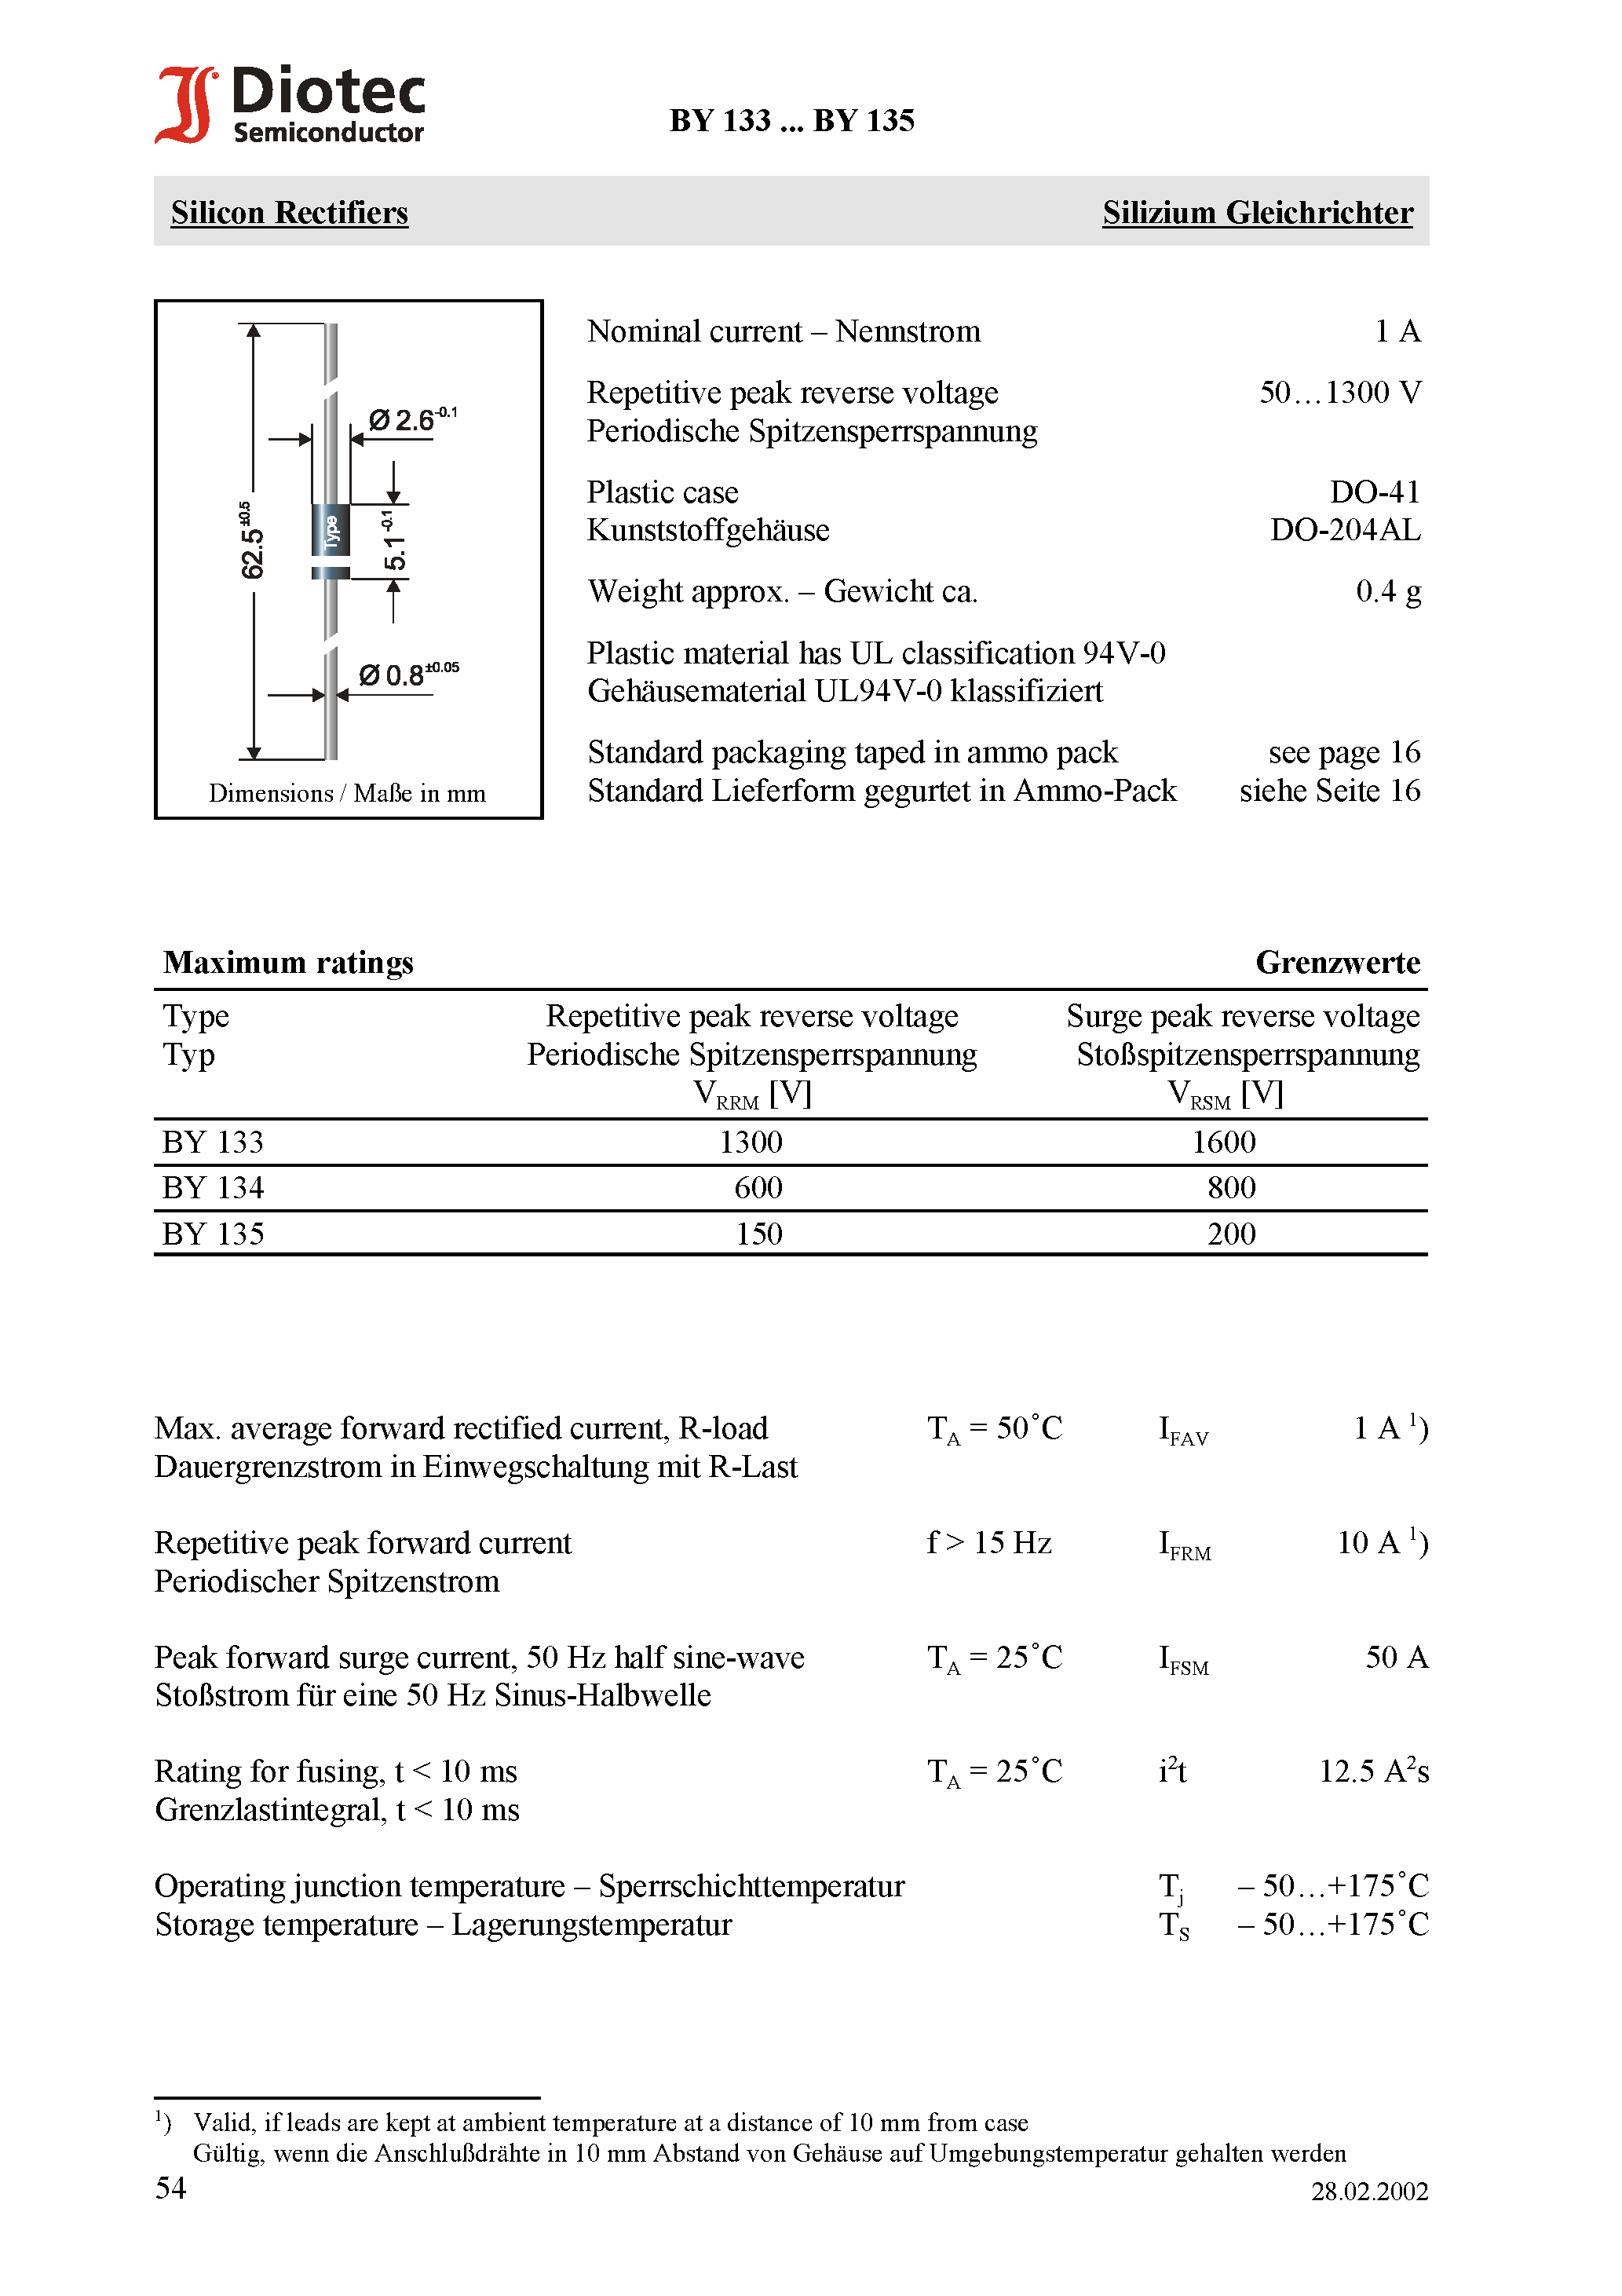 Datasheet BY134 - Silicon Rectifiers page 1